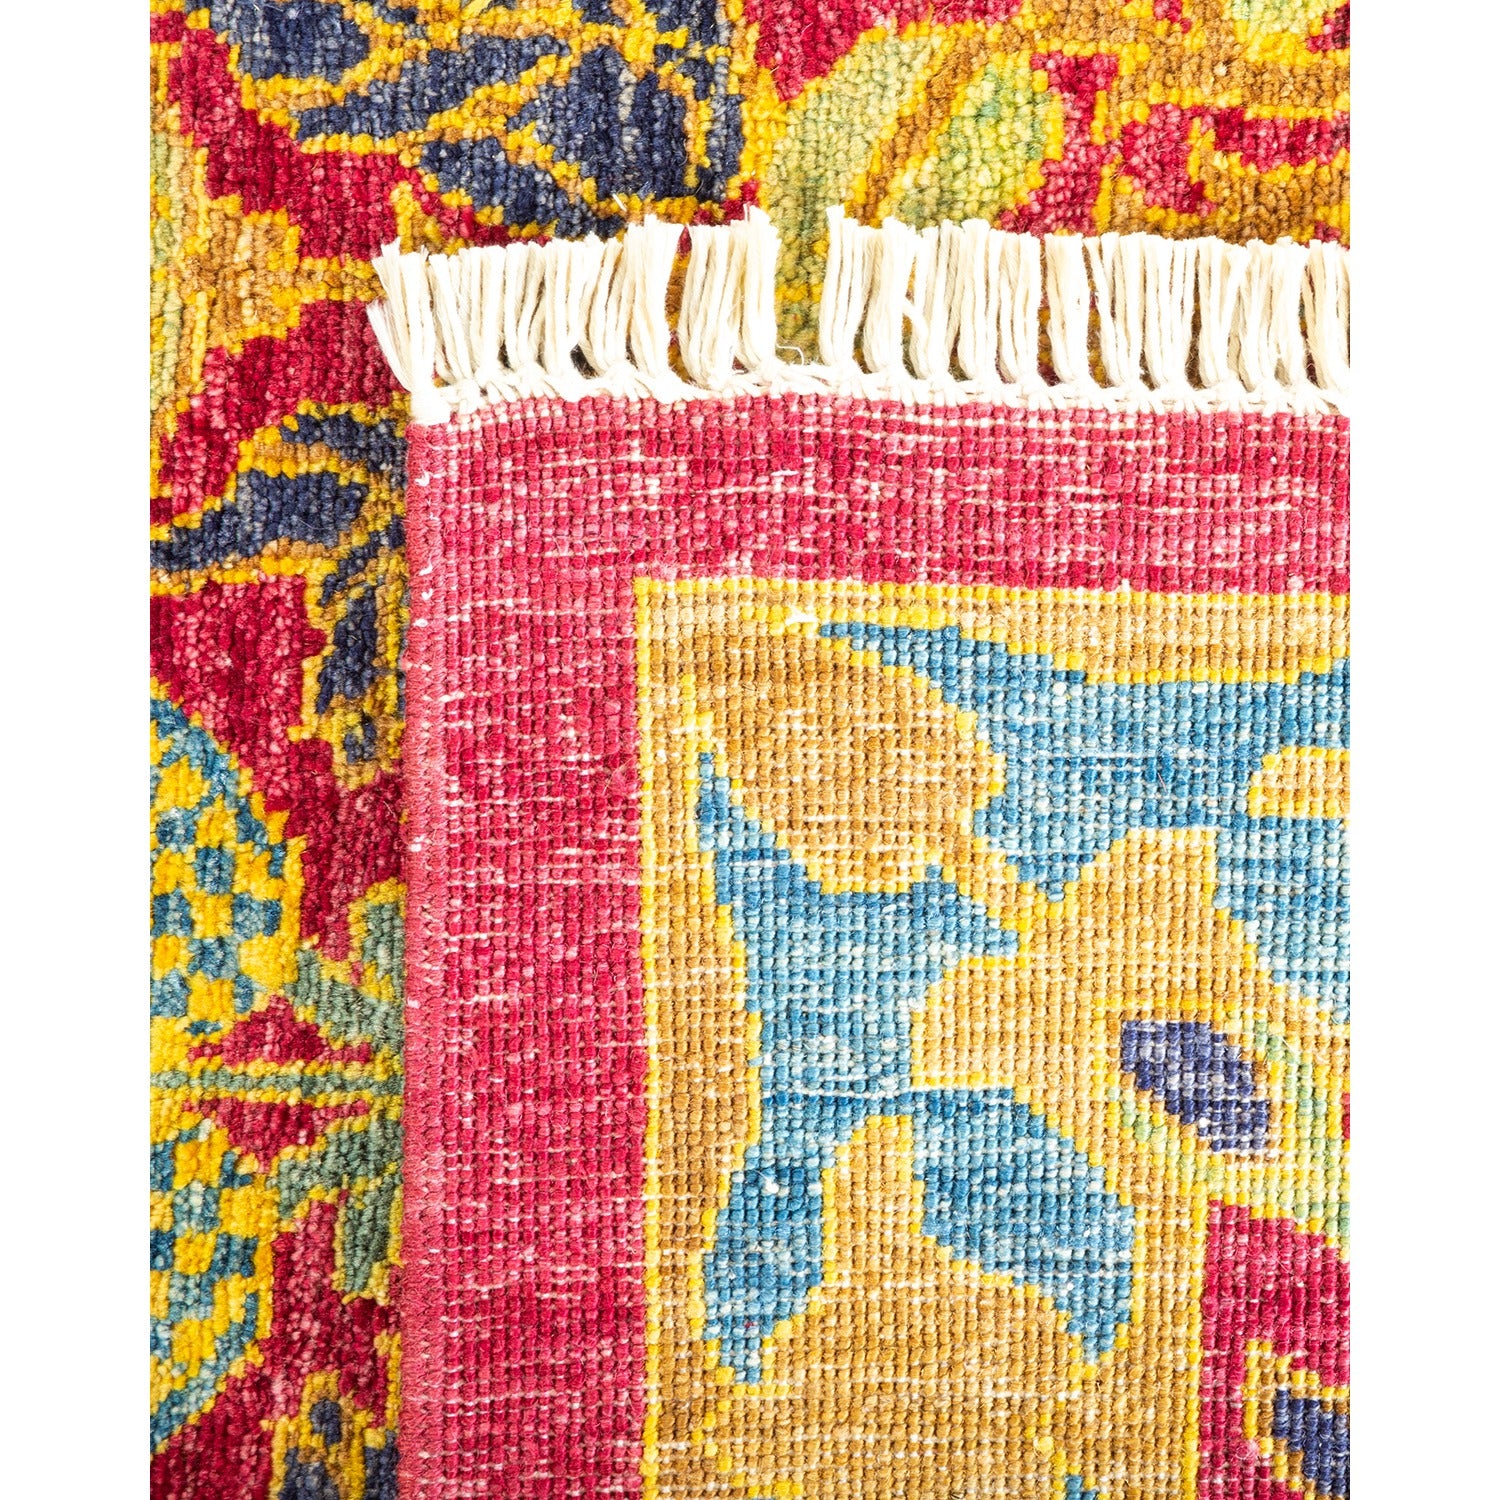 Vibrant floral tapestry with intricate details and colorful woven design